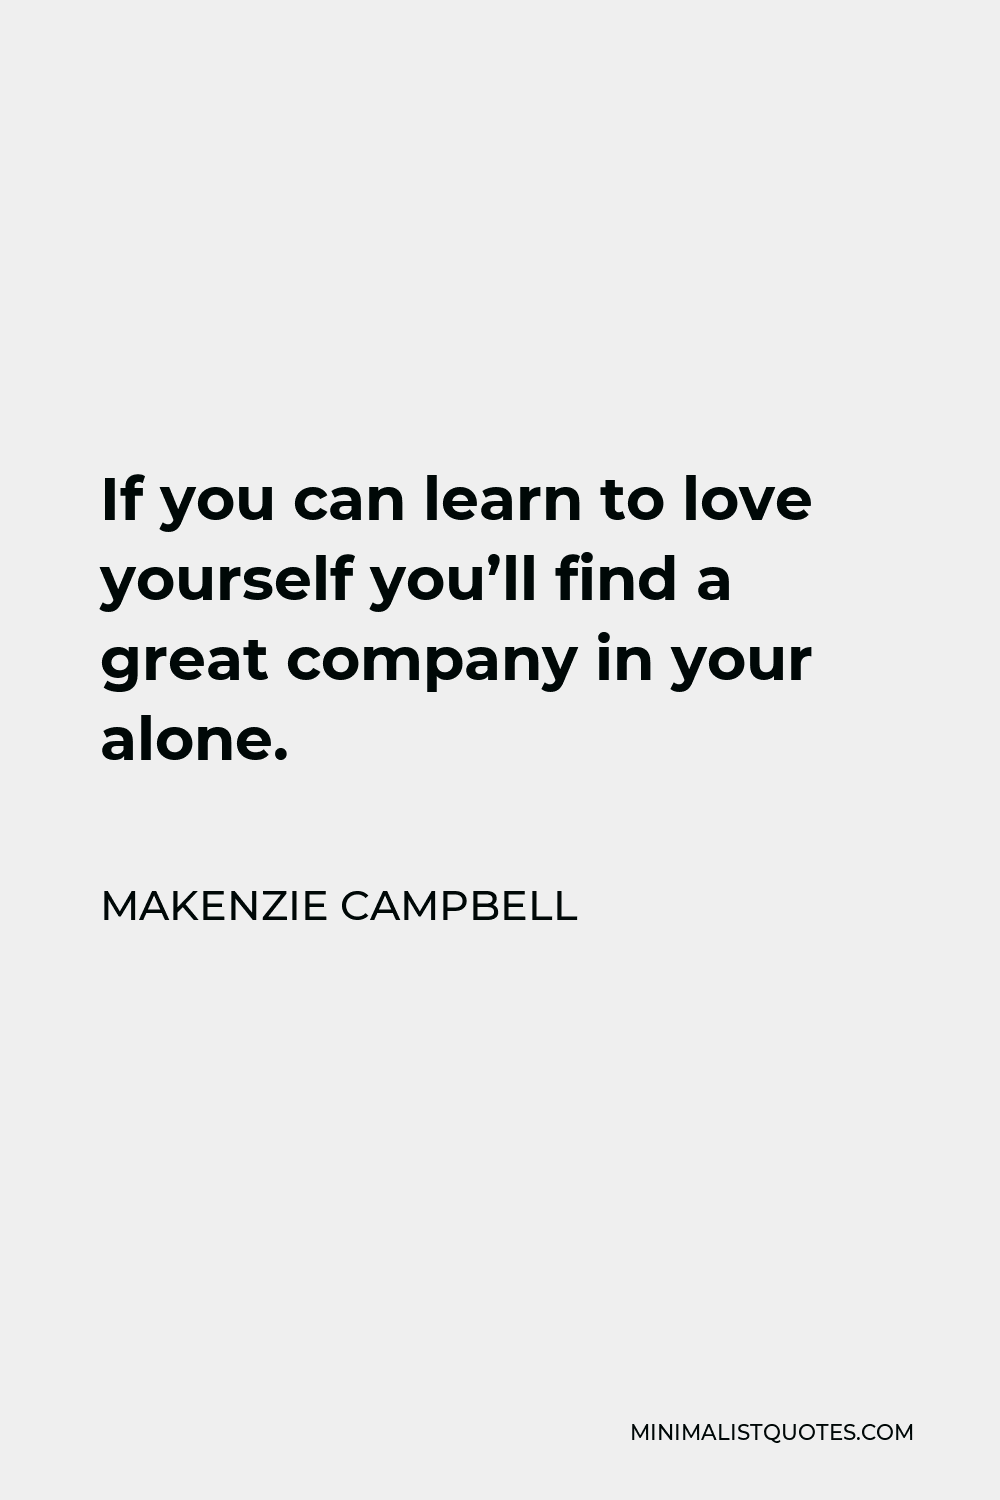 Makenzie Campbell Quote - If you can learn to love yourself you’ll find a great company in your alone.